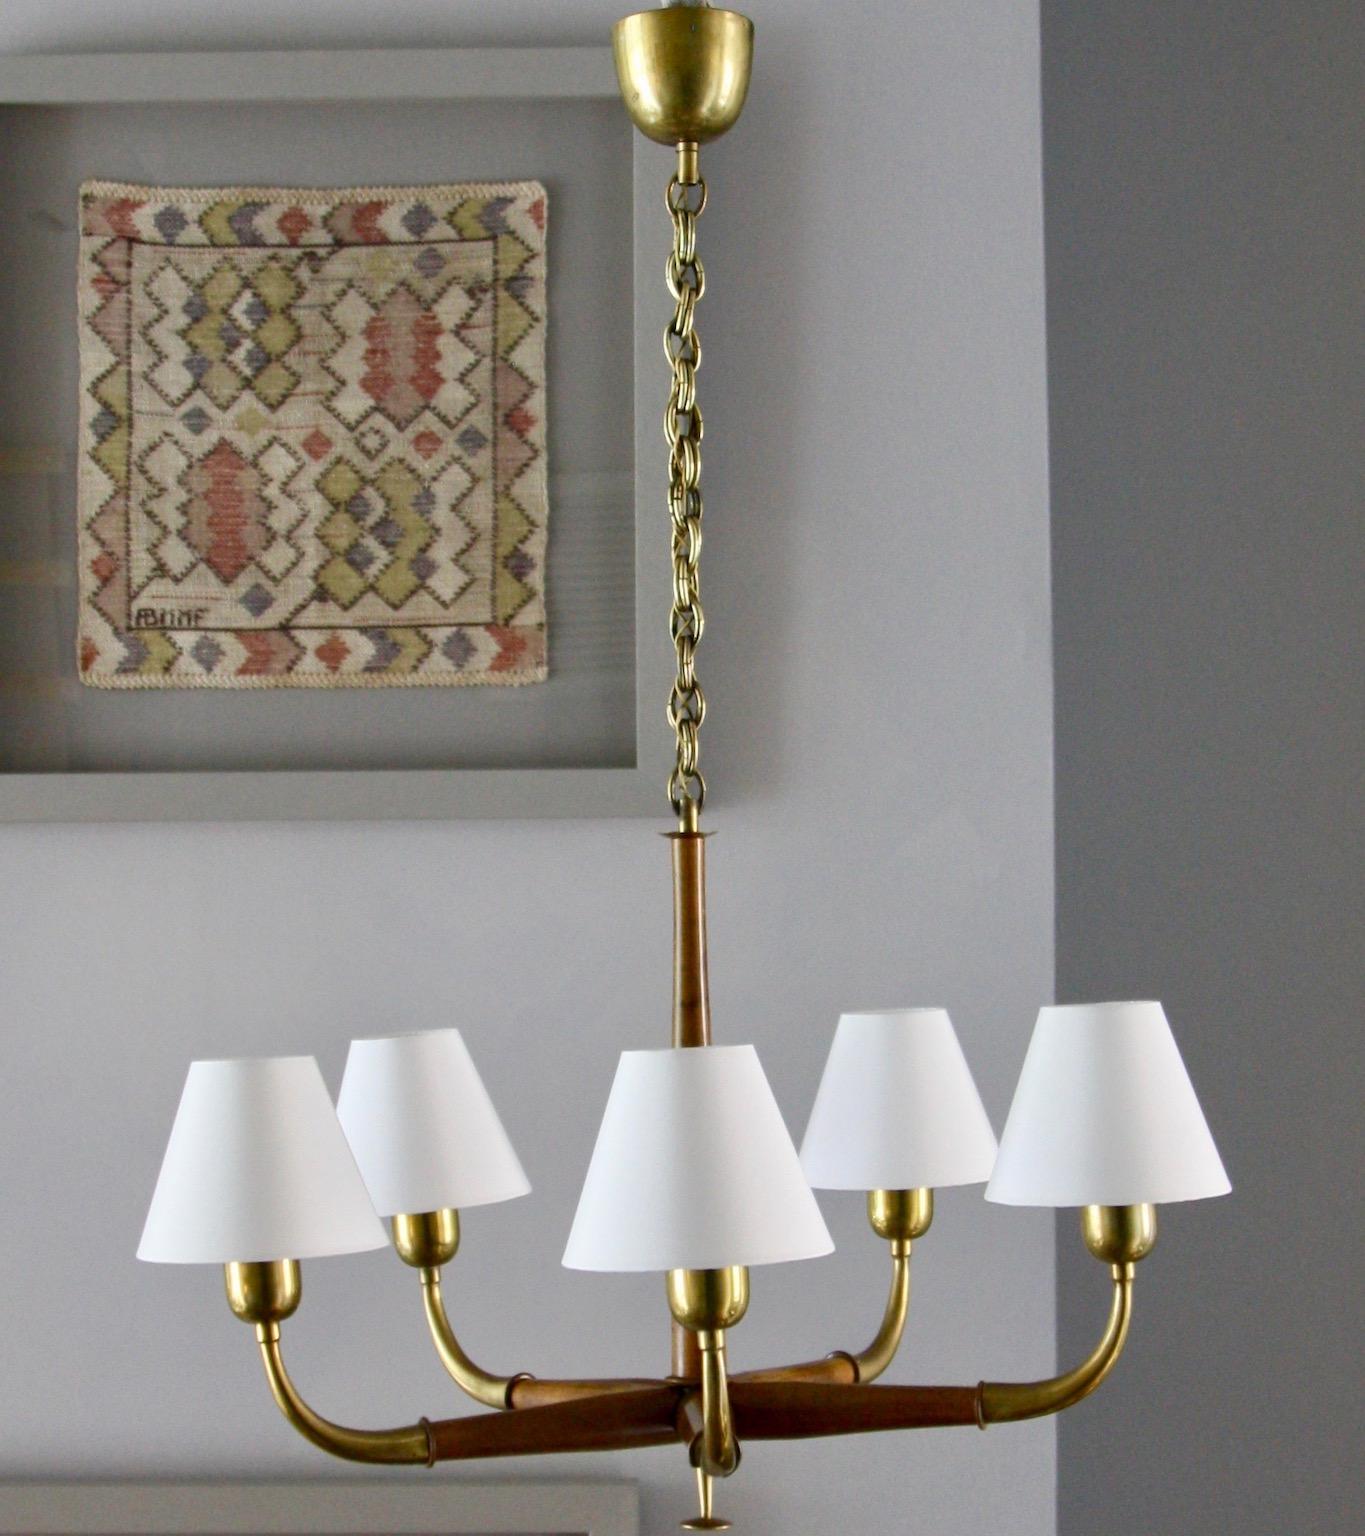 An distinctive pendant light featuring carved mahogany sections, brass details and neutral candle lampshades, Austria, circa 1940-1955.
The interplay between the brass and mahogany that make-up the arms of the chandelier is aesthetically very